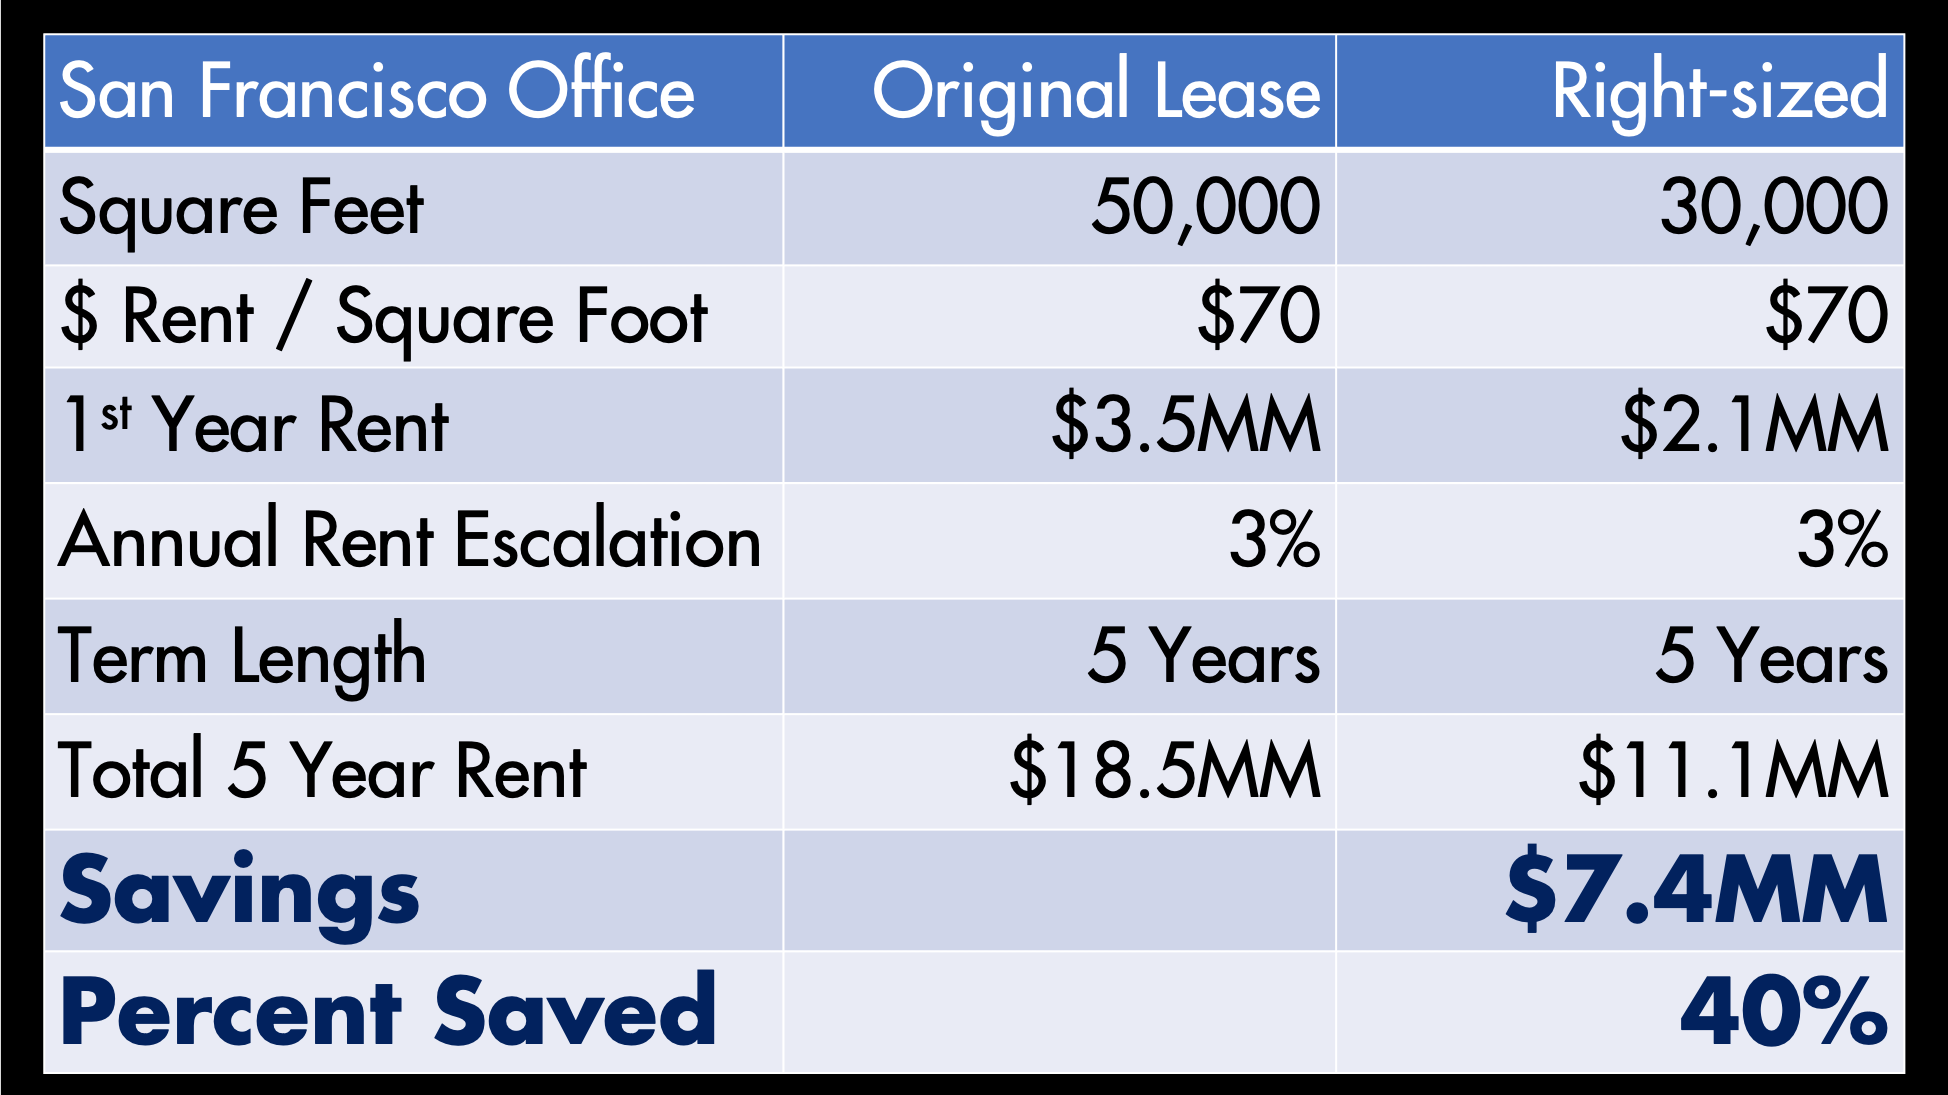 Office Lease Right-sized